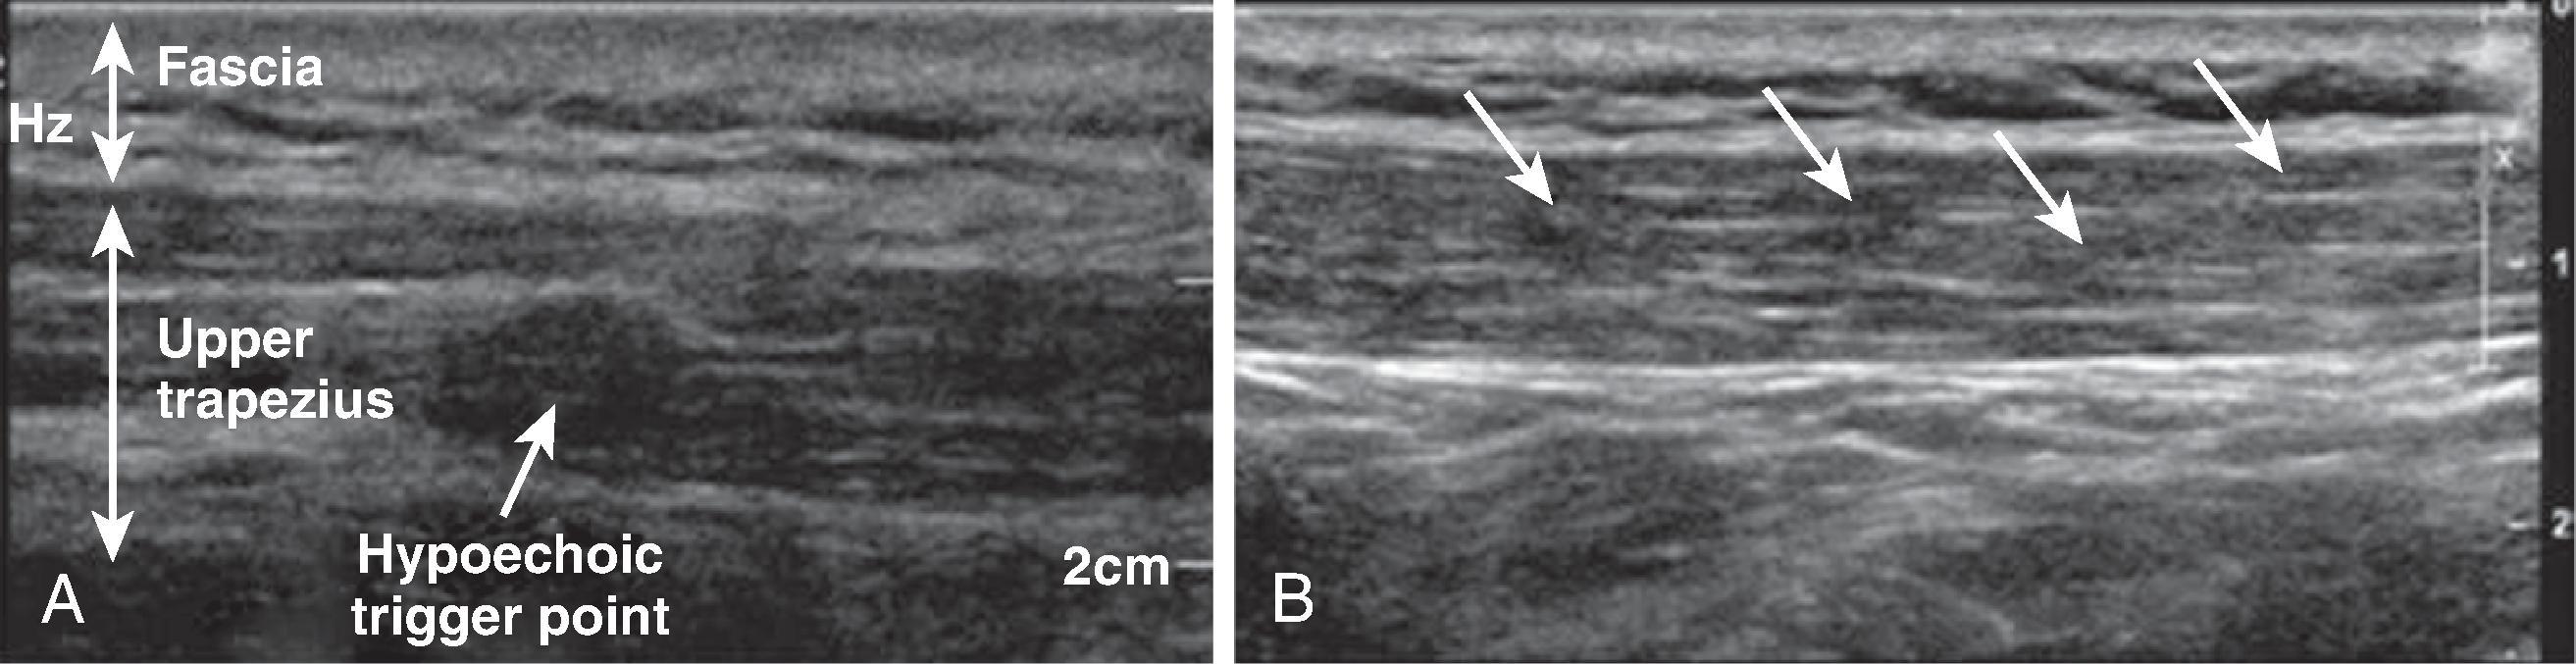 Figure 68.1, Gray-scale imaging of trigger points in the upper trapezius muscle. A, An isolated trigger point appears as a well-defined focal hypoechoic nodule. B, A series of four hypoechoic trigger points in the upper trapezius. (From Sikdar S, Shah JP, Gebreab T, et al. Novel applications of ultrasound technology to visualize and characterize myofascial trigger points and surrounding soft tissue. Arch Phys Med Rehabil . 2009;90:1829-1838, with permission.)